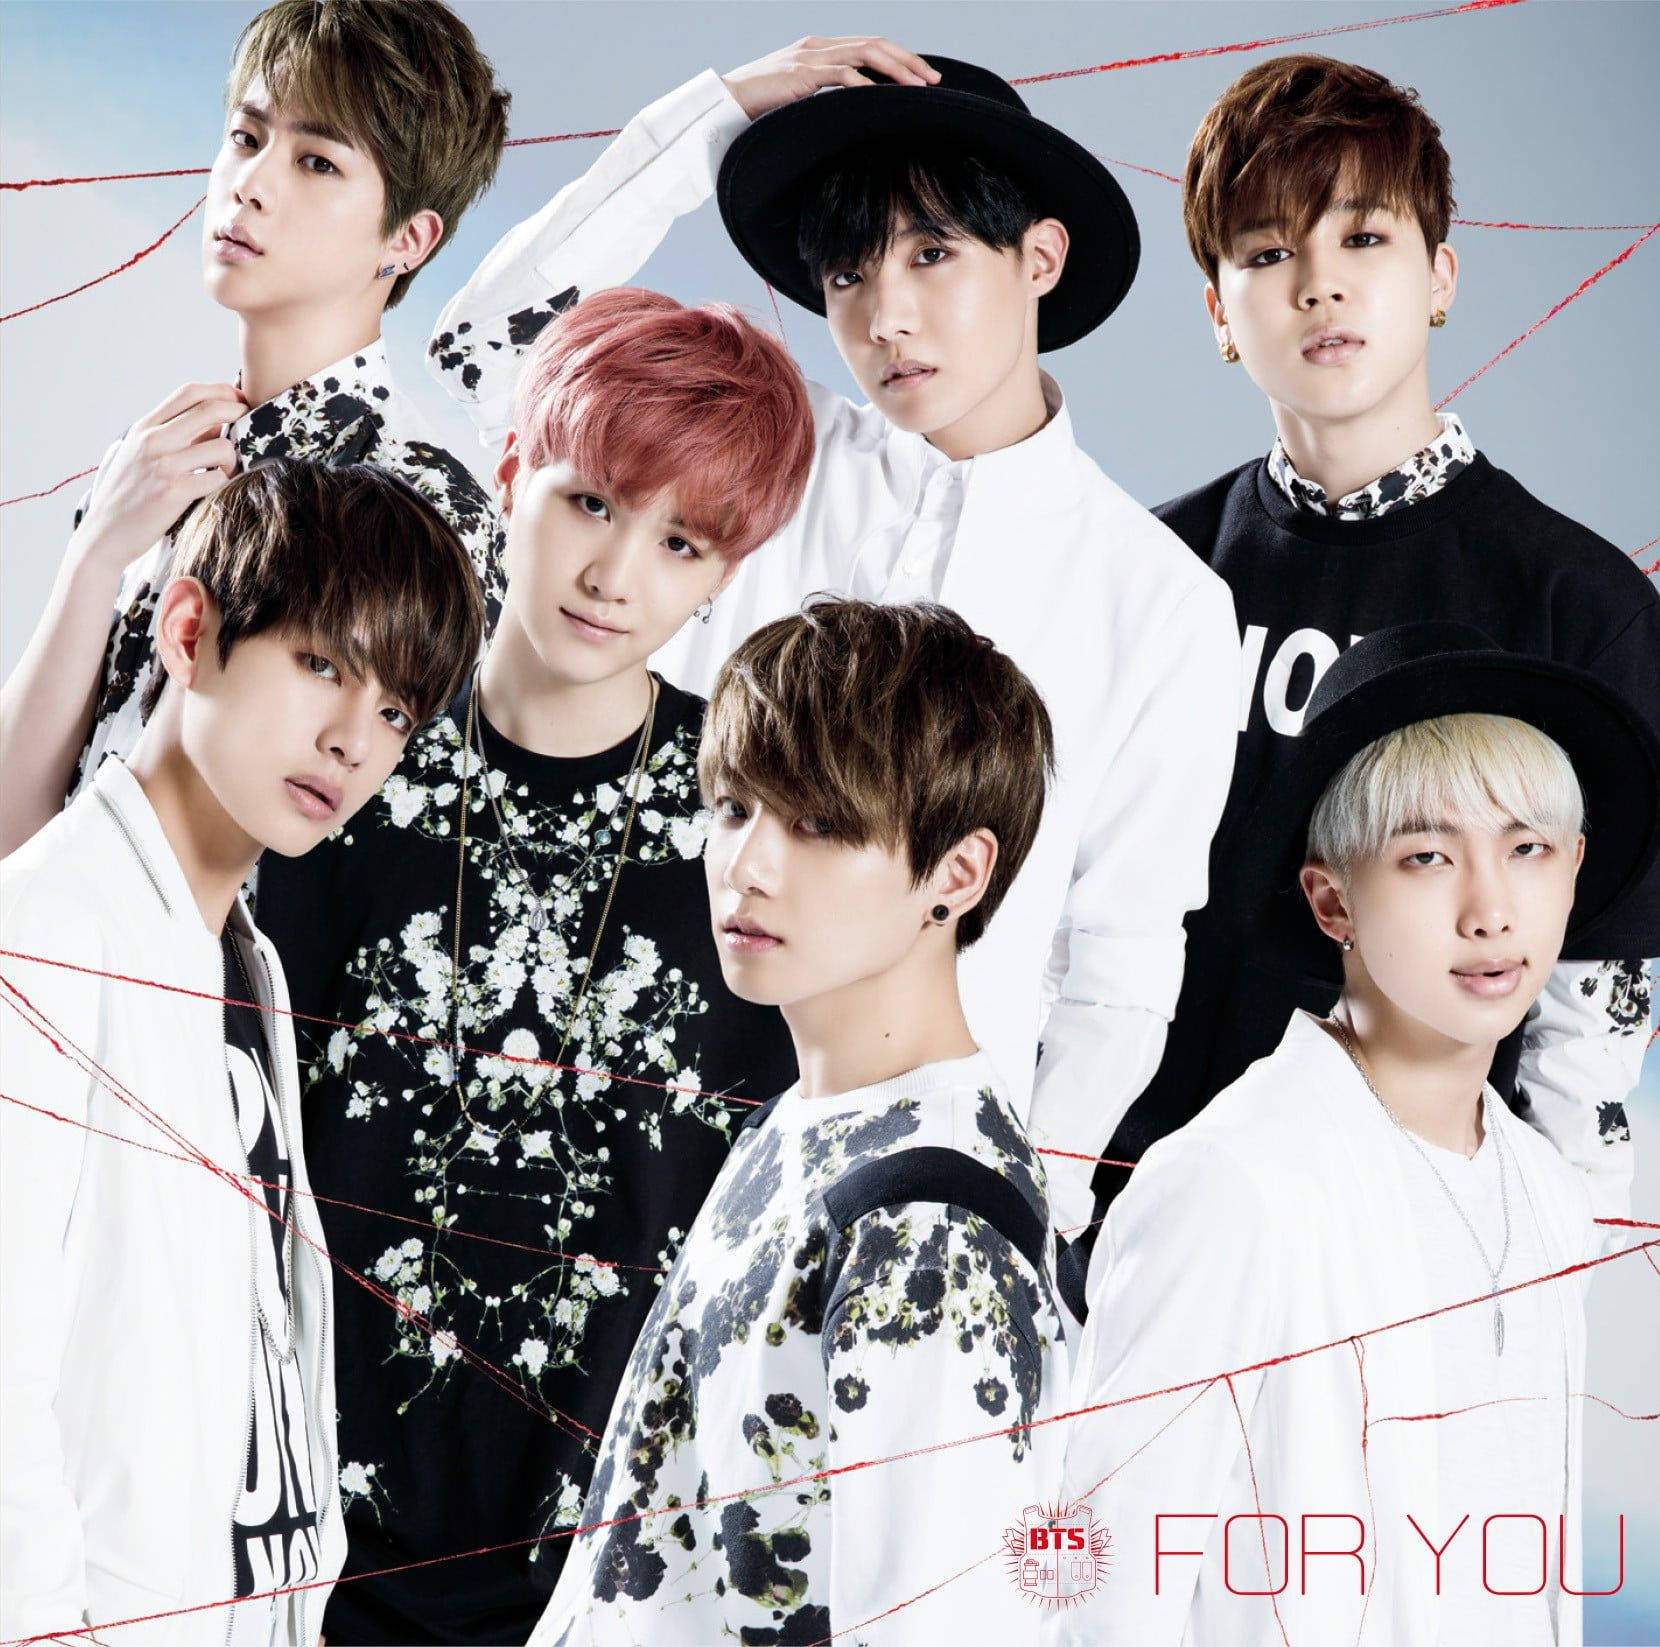 For You Era Bts Group Aesthetic Photo Wallpaper